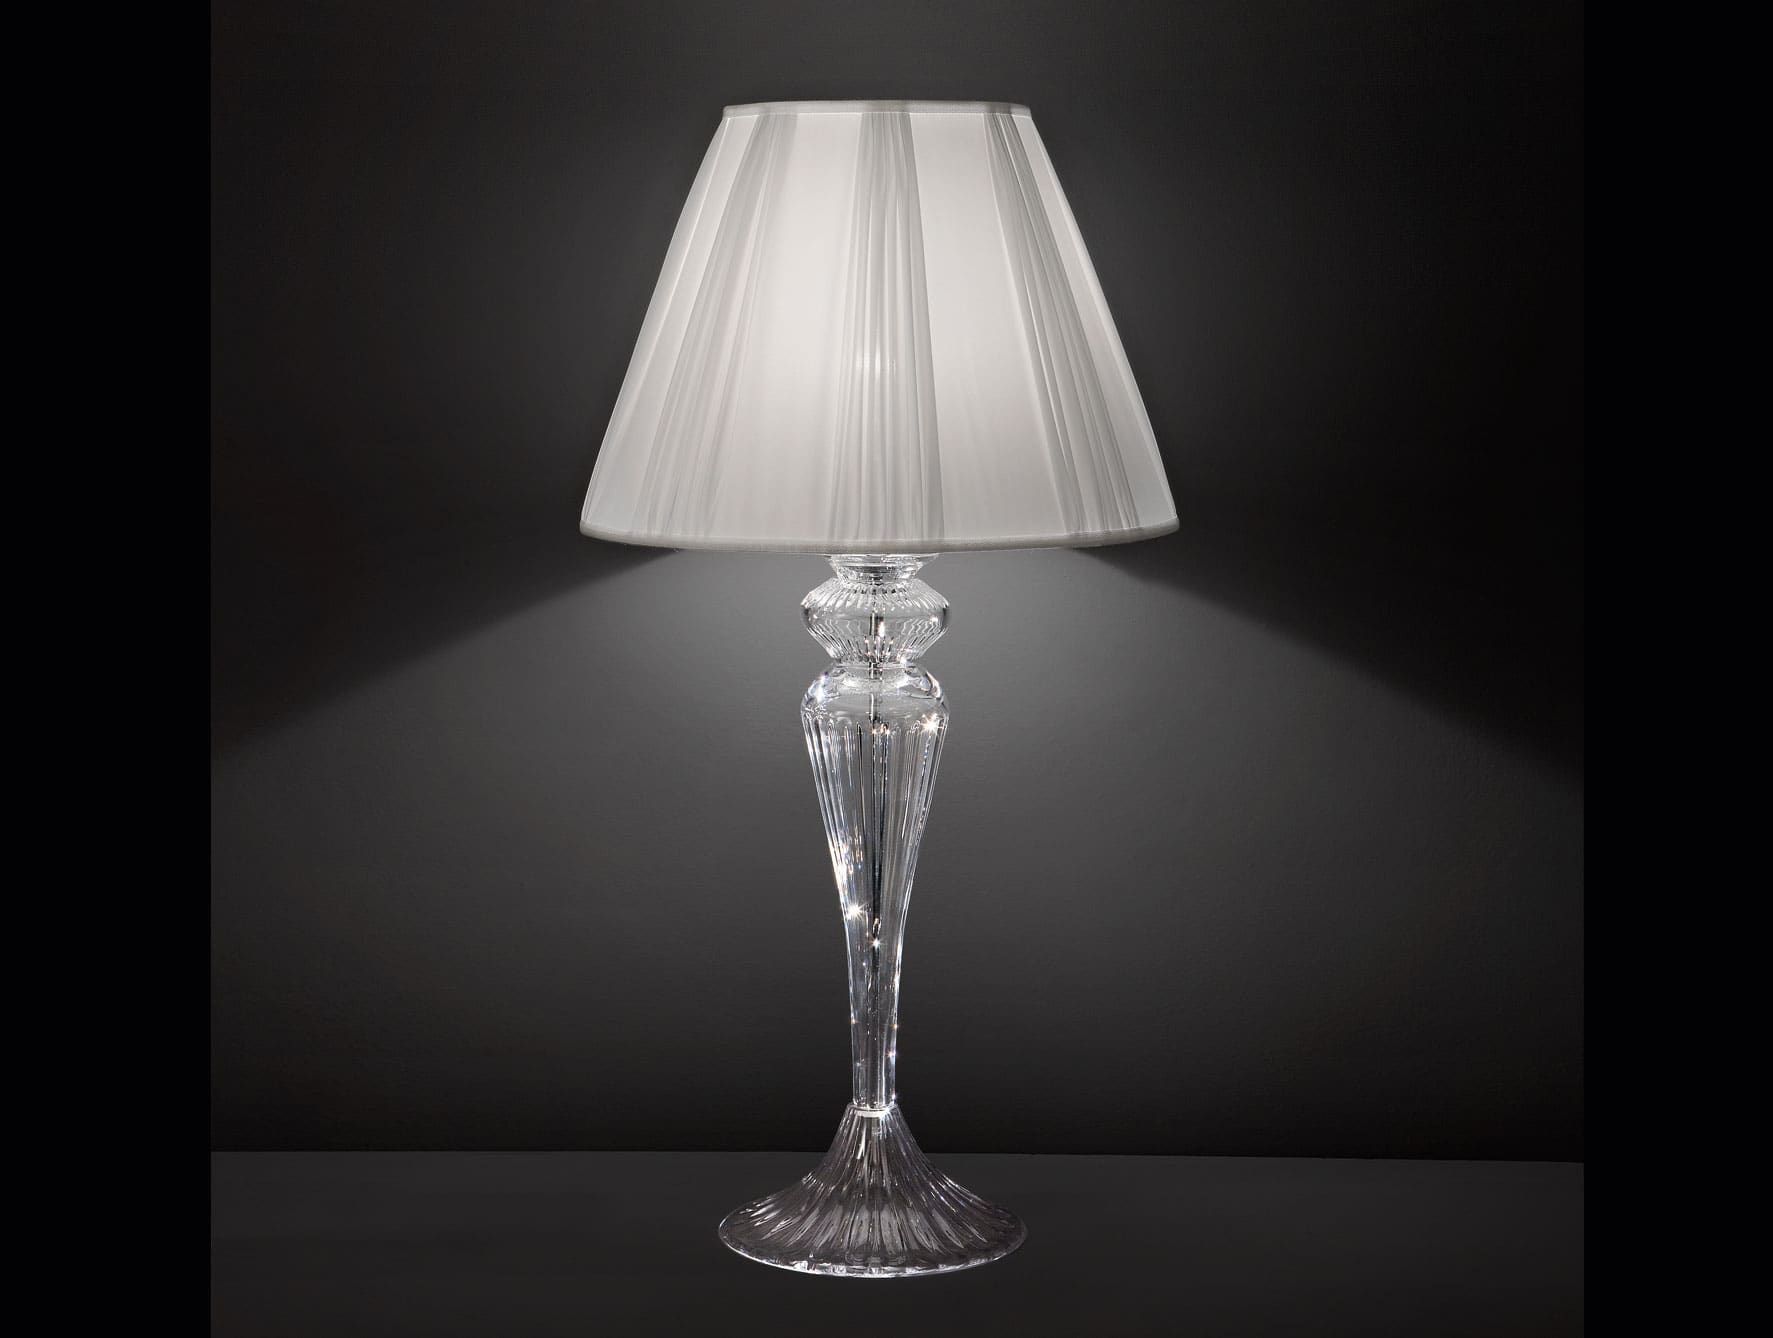 8111 modern Italian table lamp with clear glass